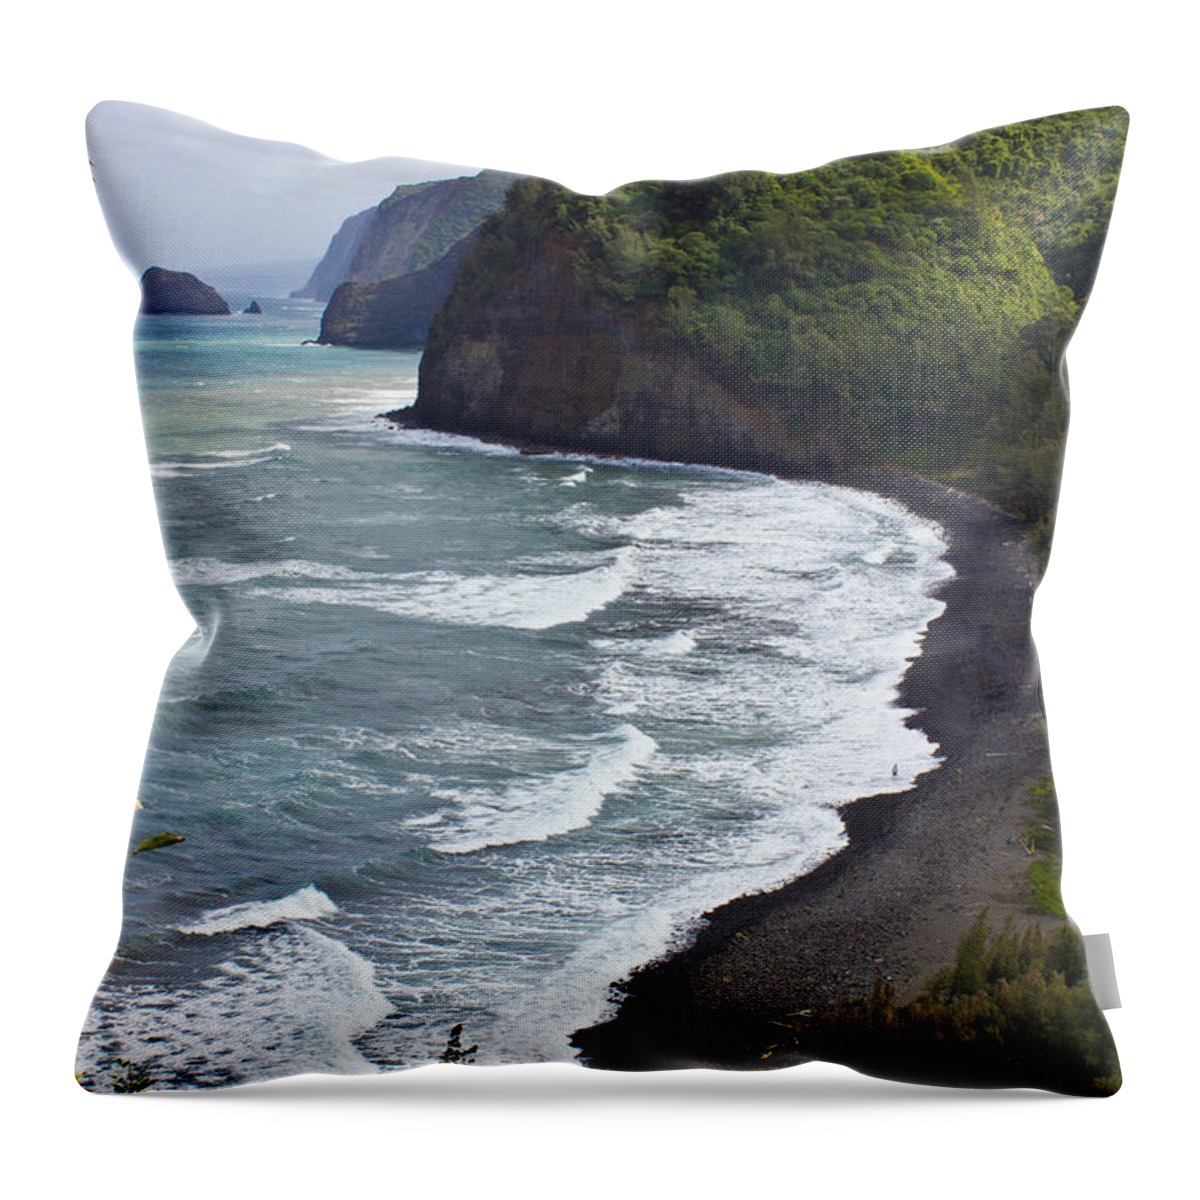 Water Throw Pillow featuring the photograph Tropical Beach 2 by Christie Kowalski